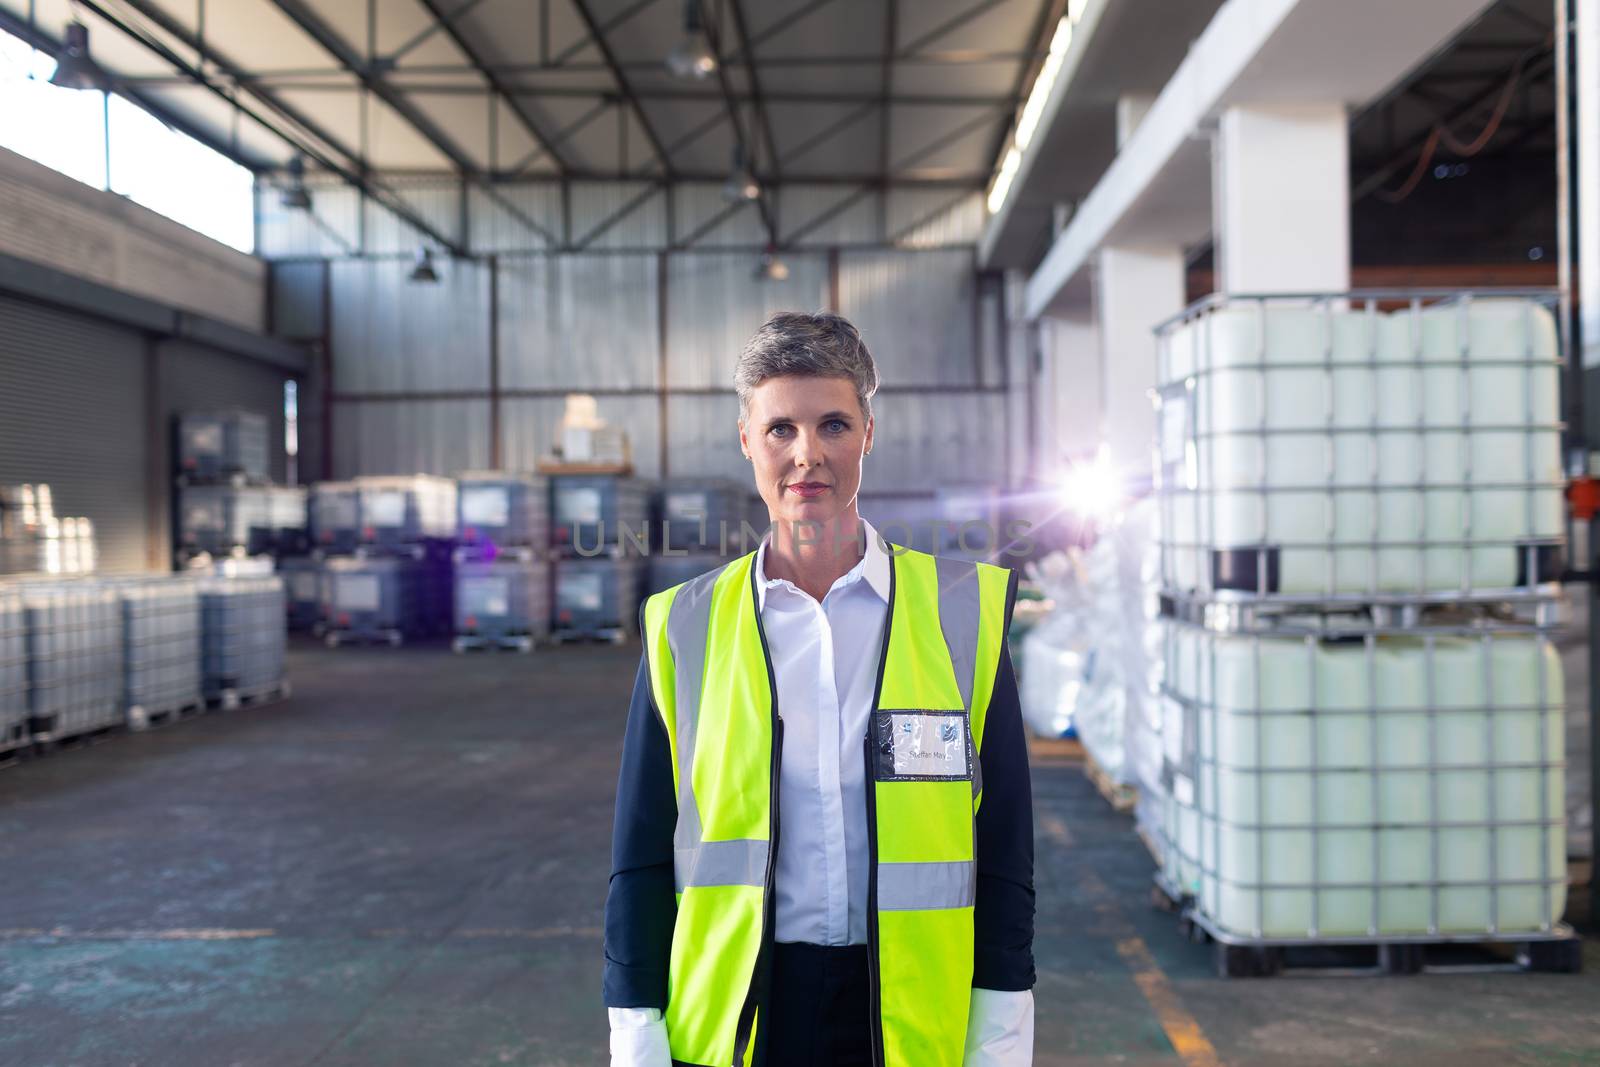 Mature female staff in reflective jacket standing in warehouse by Wavebreakmedia